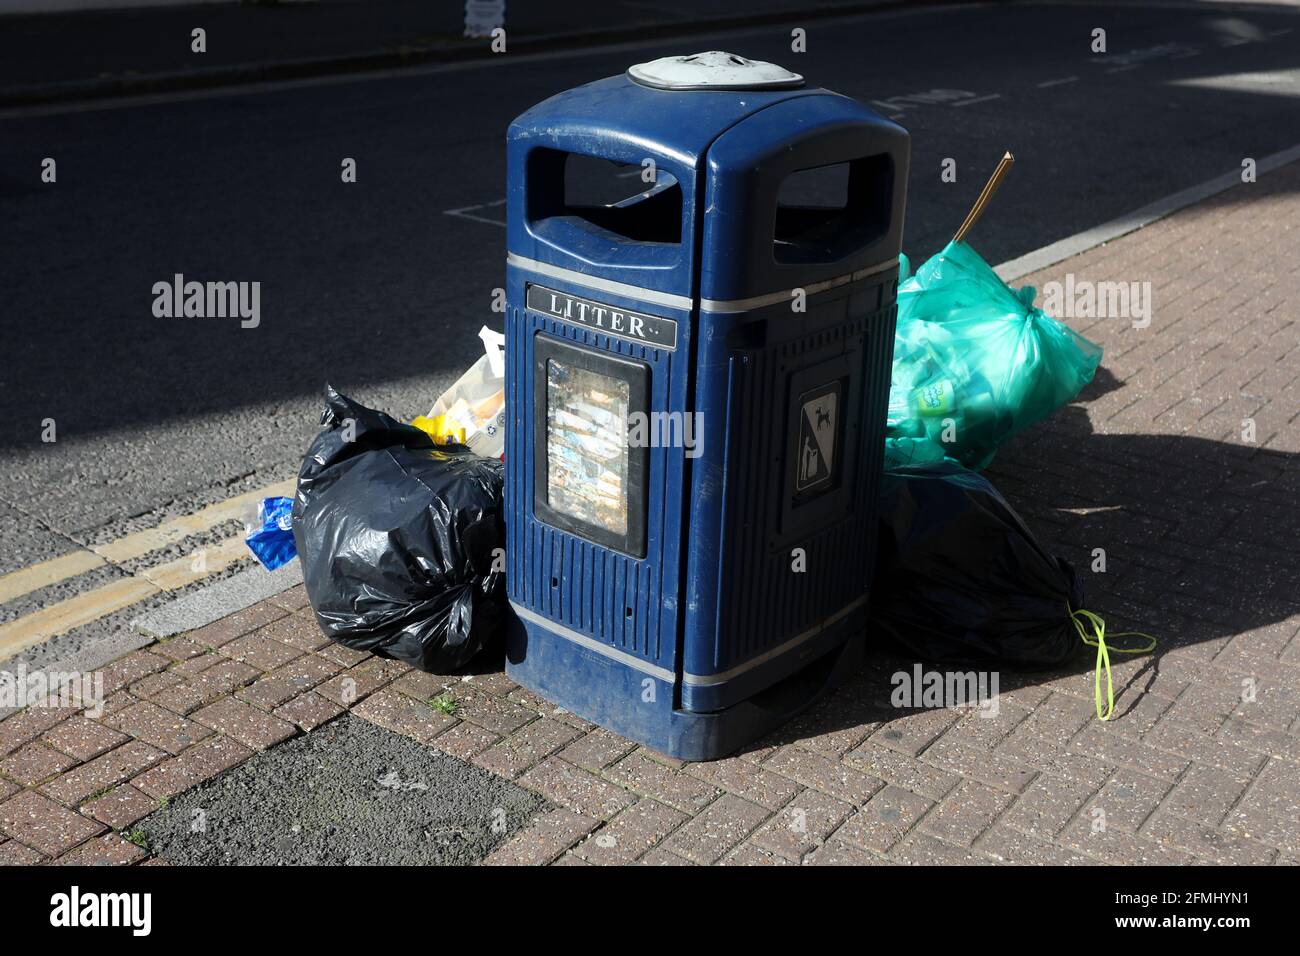 Overflowing public bins on the streets of London, UK. Stock Photo